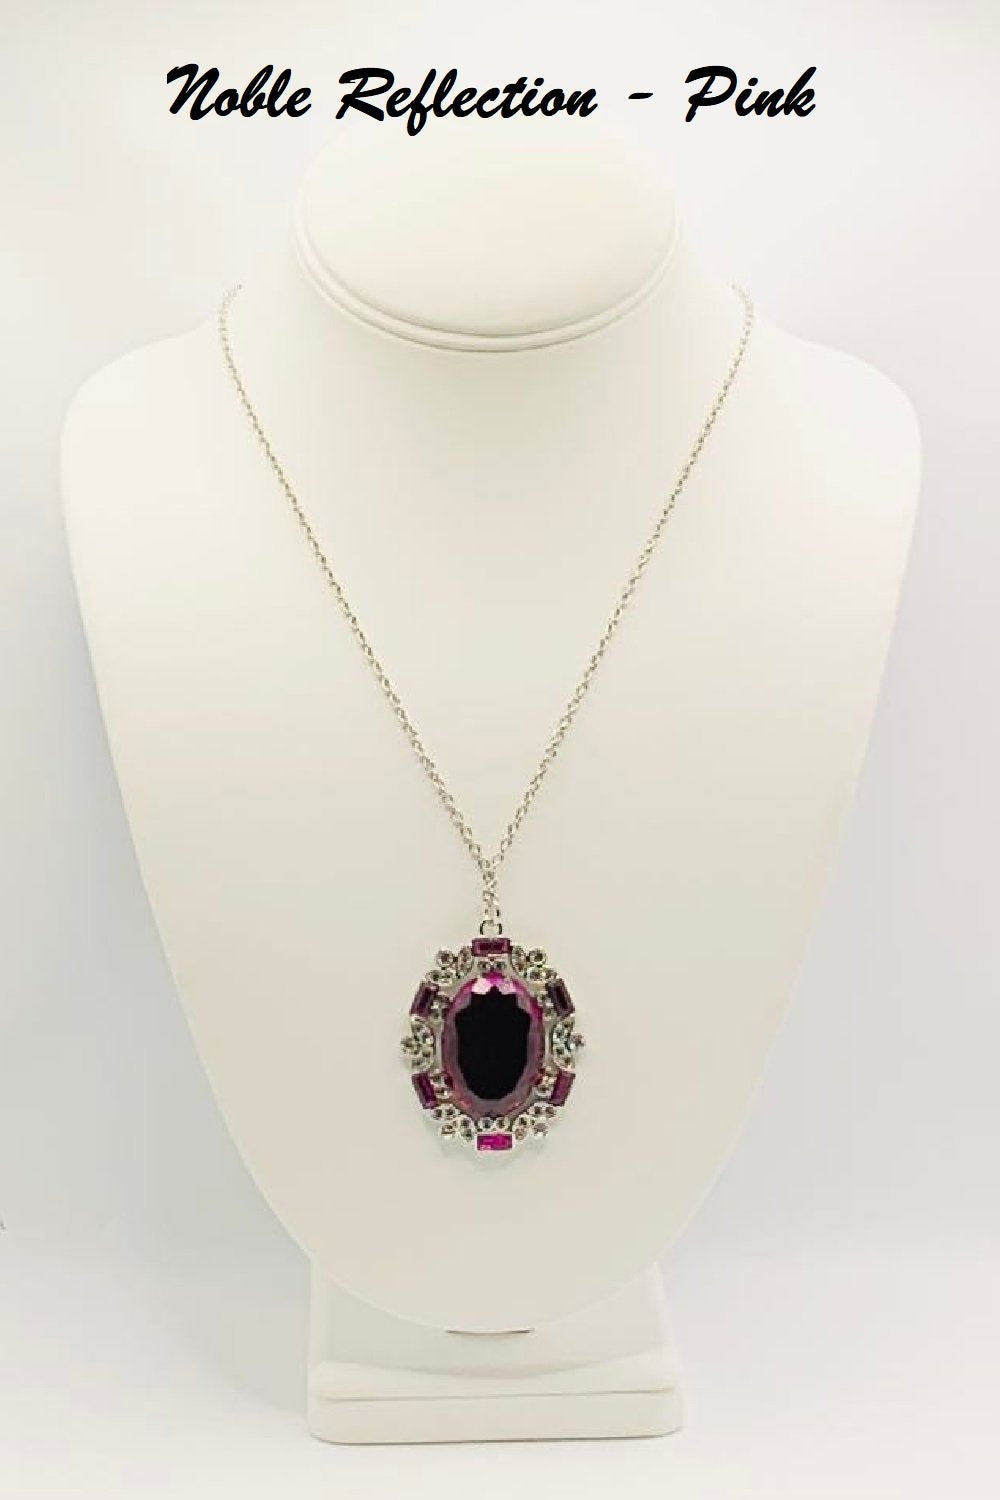 Noble Reflection - Pink Necklace - Paparazzi Accessories